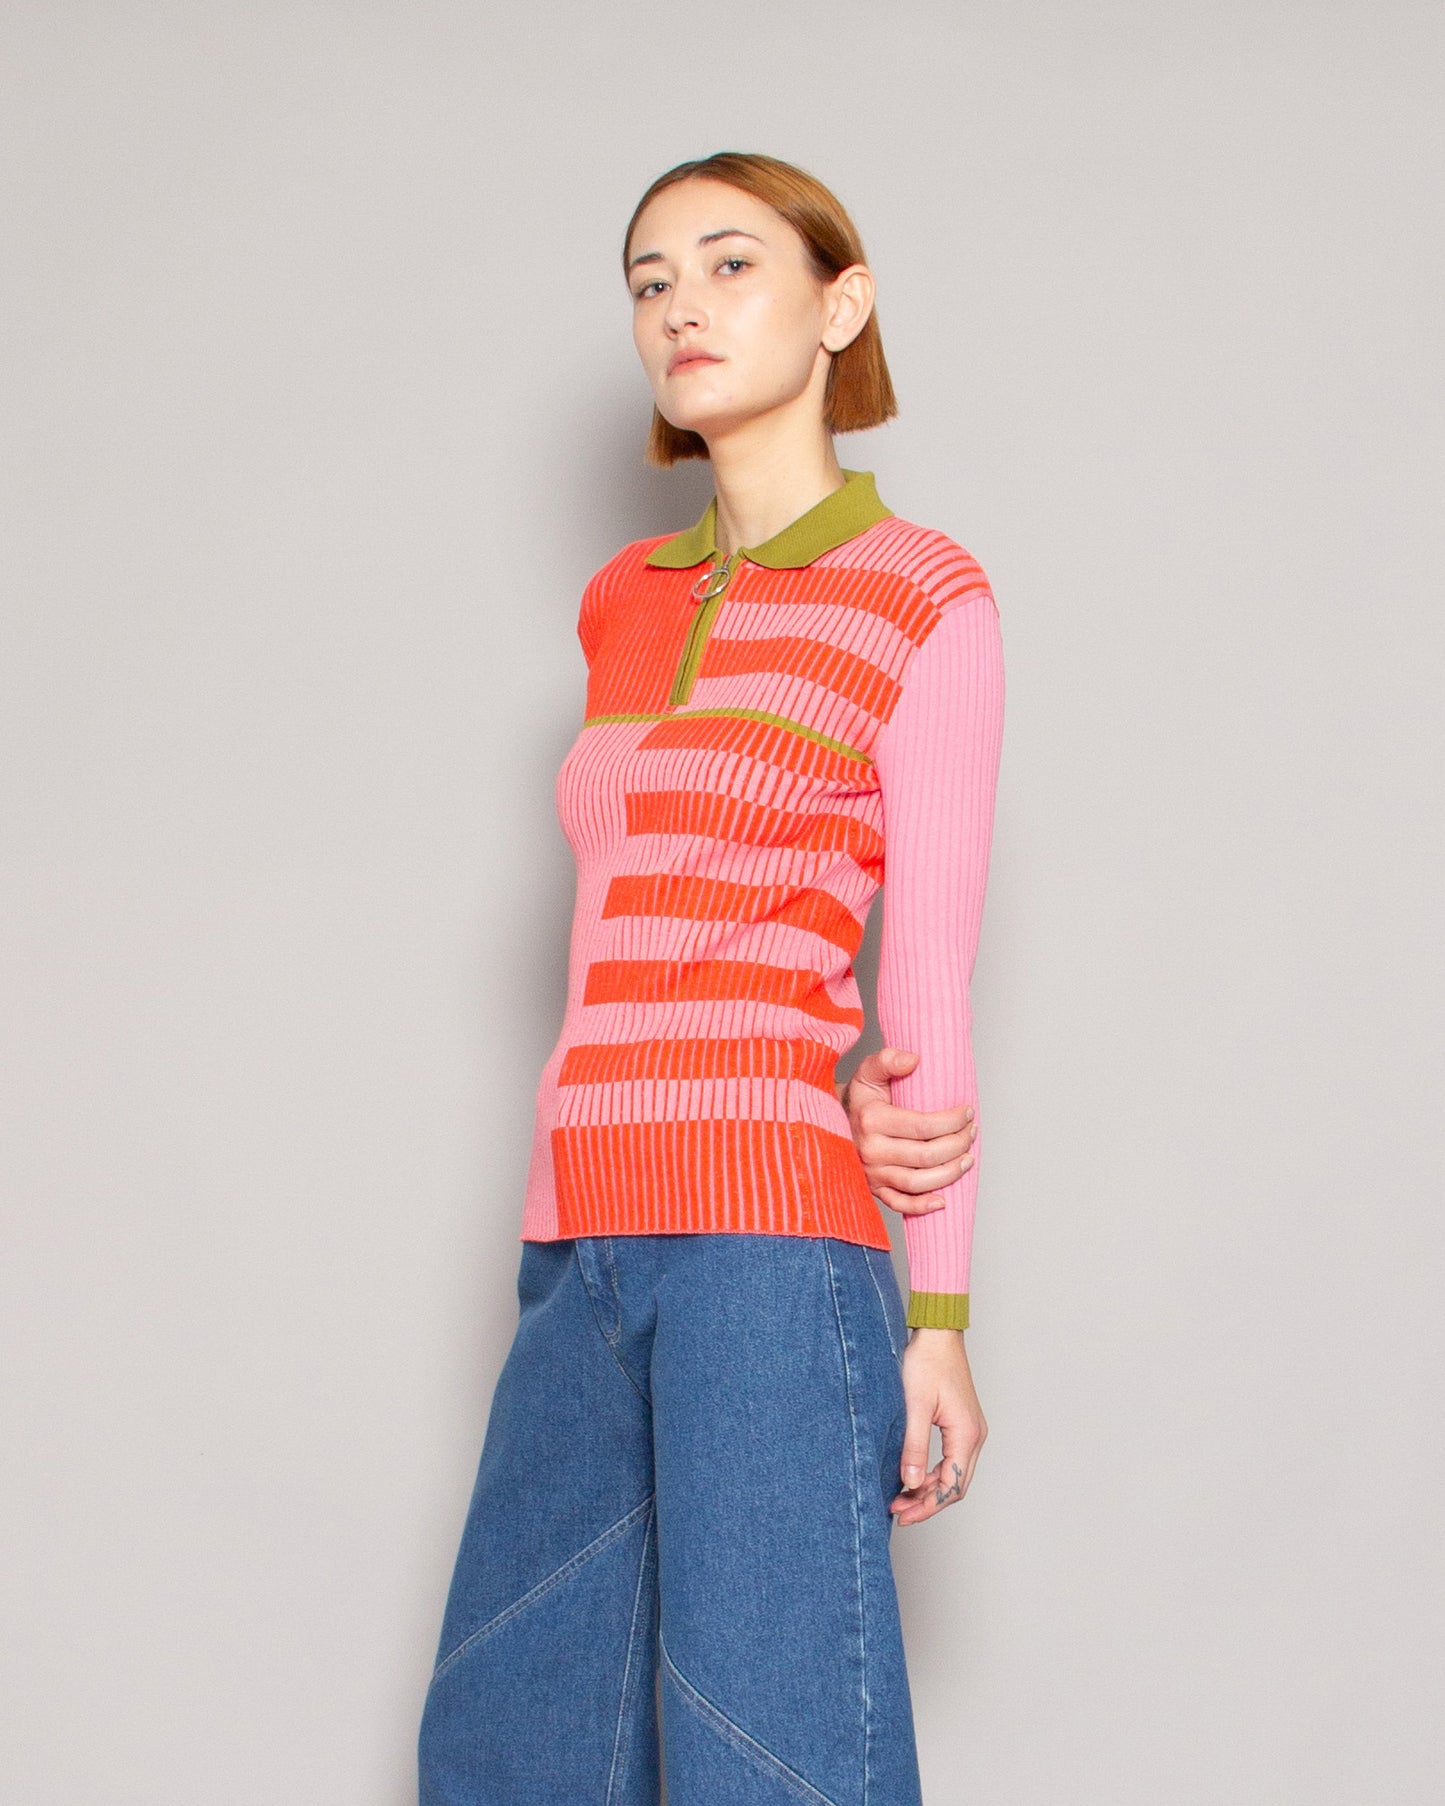 BEATRICE.B Half Zip Ribbed Knit Top in Pink Multi-Stripe available at Lahn.shop